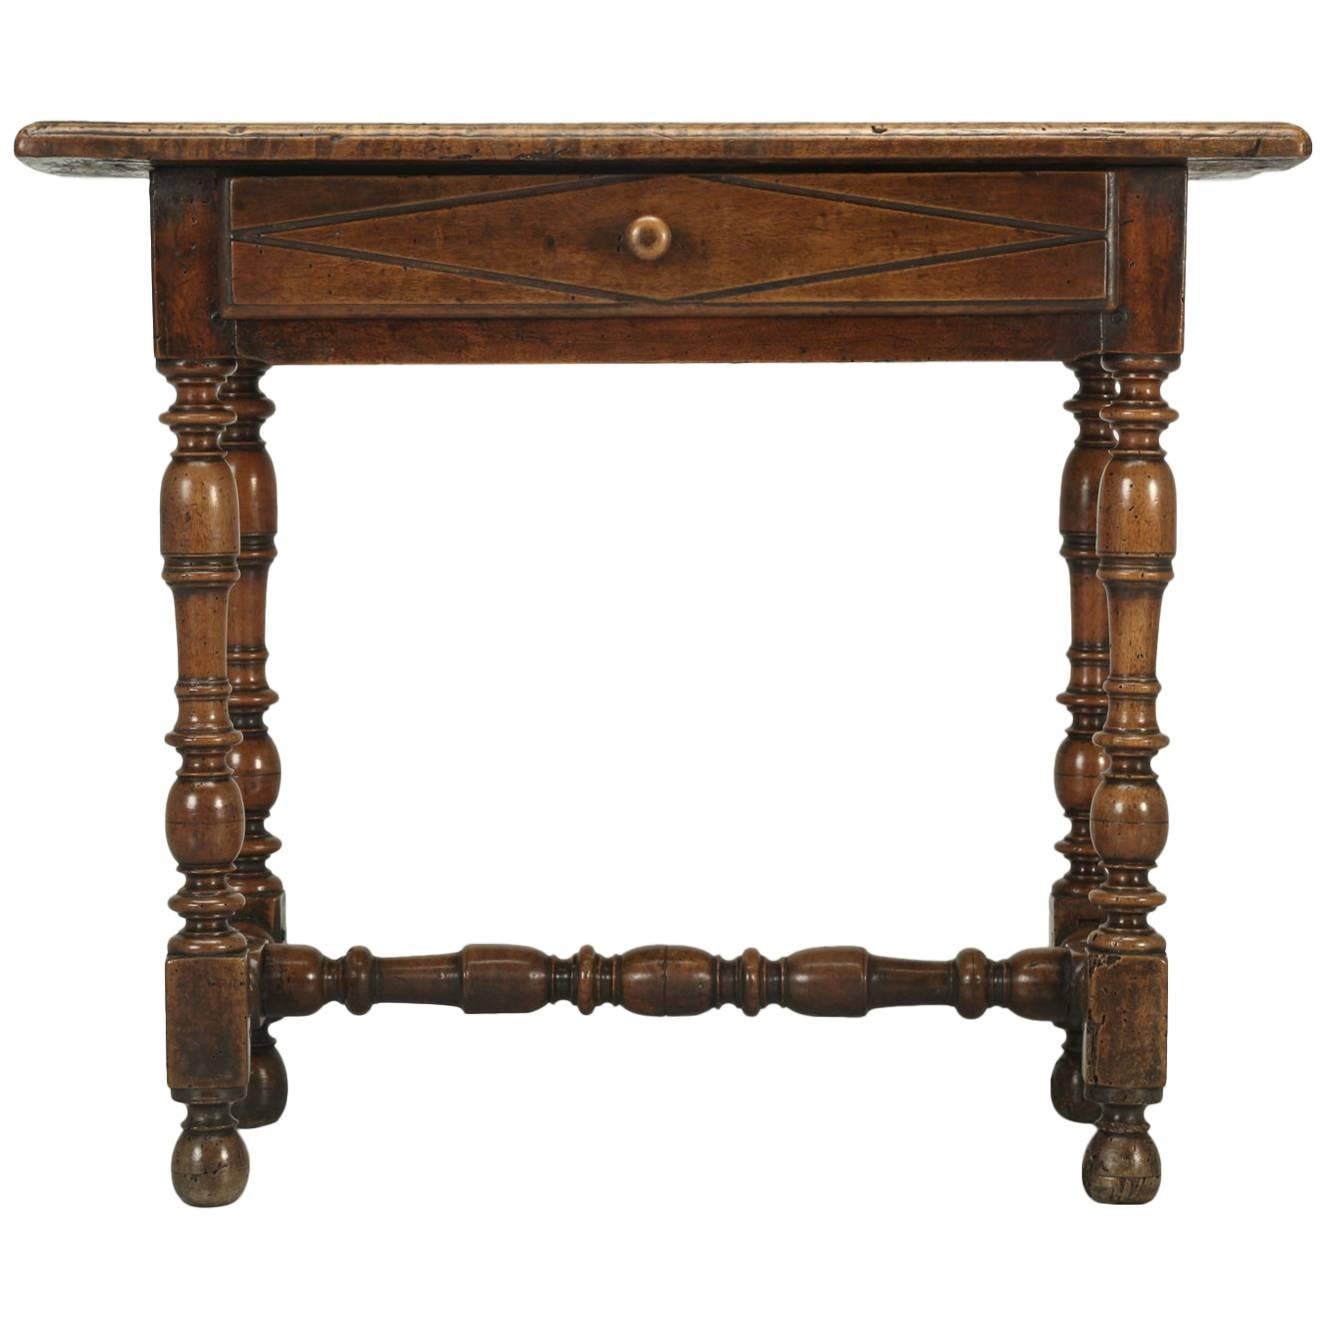 Antique Country French Side or End Table from the Early 1700s